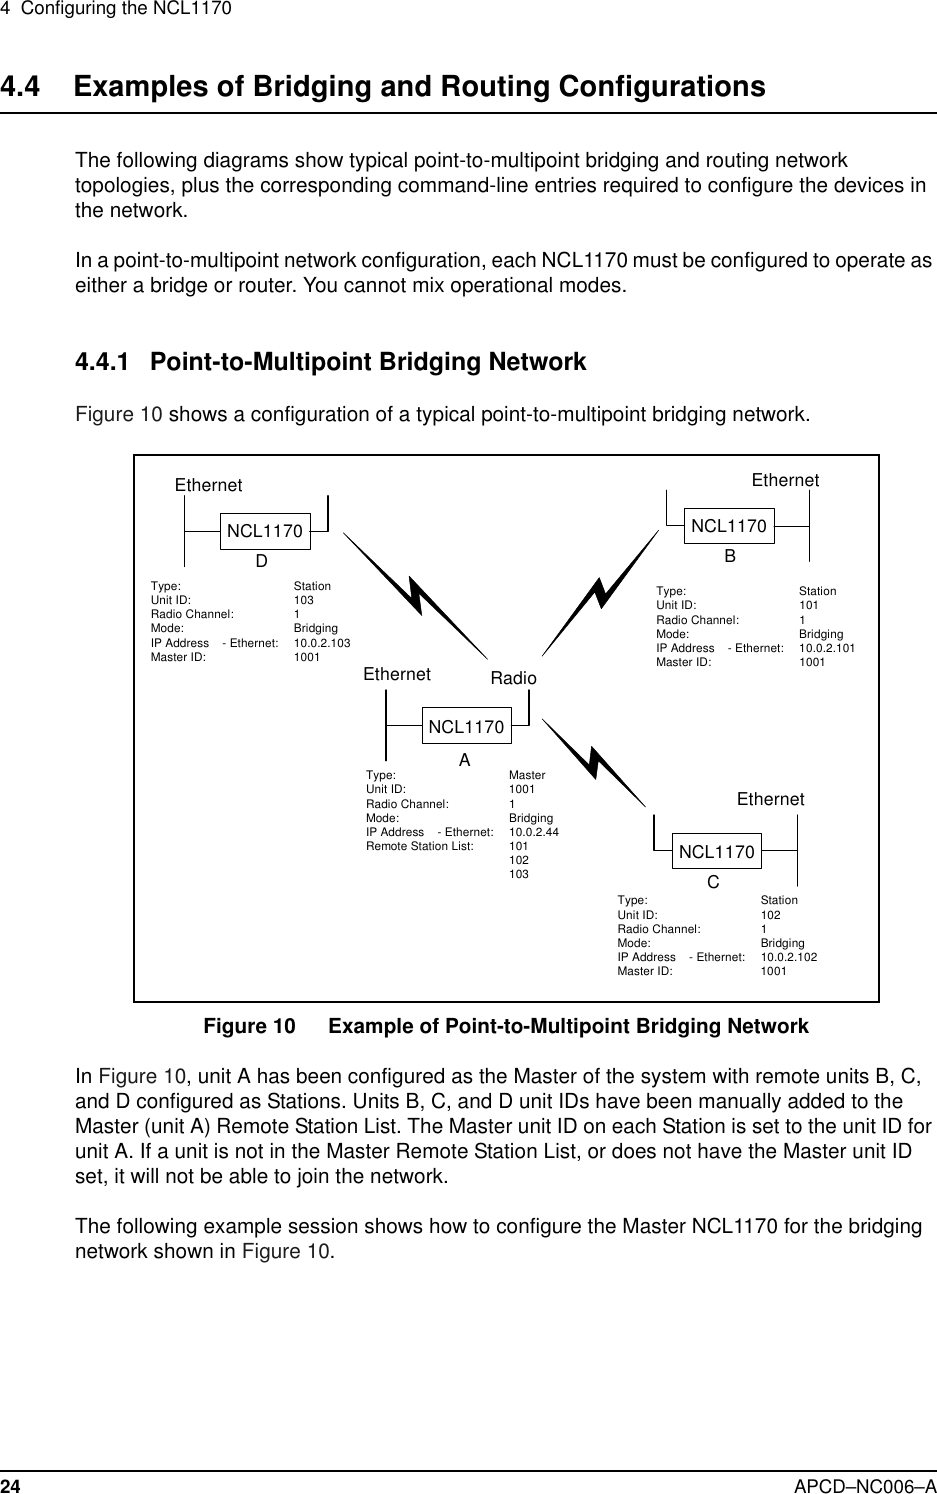 4 Configuring the NCL117024 APCD–NC006–A4.4 Examples of Bridging and Routing ConfigurationsThe following diagrams show typical point-to-multipoint bridging and routing networktopologies, plus the corresponding command-line entries required to configure the devices inthe network.In a point-to-multipoint network configuration, each NCL1170 must be configured to operate aseither a bridge or router. You cannot mix operational modes.4.4.1 Point-to-Multipoint Bridging NetworkFigure 10 shows a configuration of a typical point-to-multipoint bridging network.Figure 10 Example of Point-to-Multipoint Bridging NetworkIn Figure 10, unit A has been configured as the Master of the system with remote units B, C,and D configured as Stations. Units B, C, and D unit IDs have been manually added to theMaster (unit A) Remote Station List. The Master unit ID on each Station is set to the unit ID forunit A. If a unit is not in the Master Remote Station List, or does not have the Master unit IDset, it will not be able to join the network.The following example session shows how to configure the Master NCL1170 for the bridgingnetwork shown in Figure 10.EthernetNCL1170CEthernetNCL1170BEthernetNCL1170DEthernet RadioNCL1170AType: StationUnit ID: 103Radio Channel: 1Mode: BridgingIP Address - Ethernet: 10.0.2.103Master ID: 1001Type: StationUnit ID: 102Radio Channel: 1Mode: BridgingIP Address - Ethernet: 10.0.2.102Master ID: 1001Type: StationUnit ID: 101Radio Channel: 1Mode: BridgingIP Address - Ethernet: 10.0.2.101Master ID: 1001Type: MasterUnit ID: 1001Radio Channel: 1Mode: BridgingIP Address - Ethernet: 10.0.2.44Remote Station List: 101102103